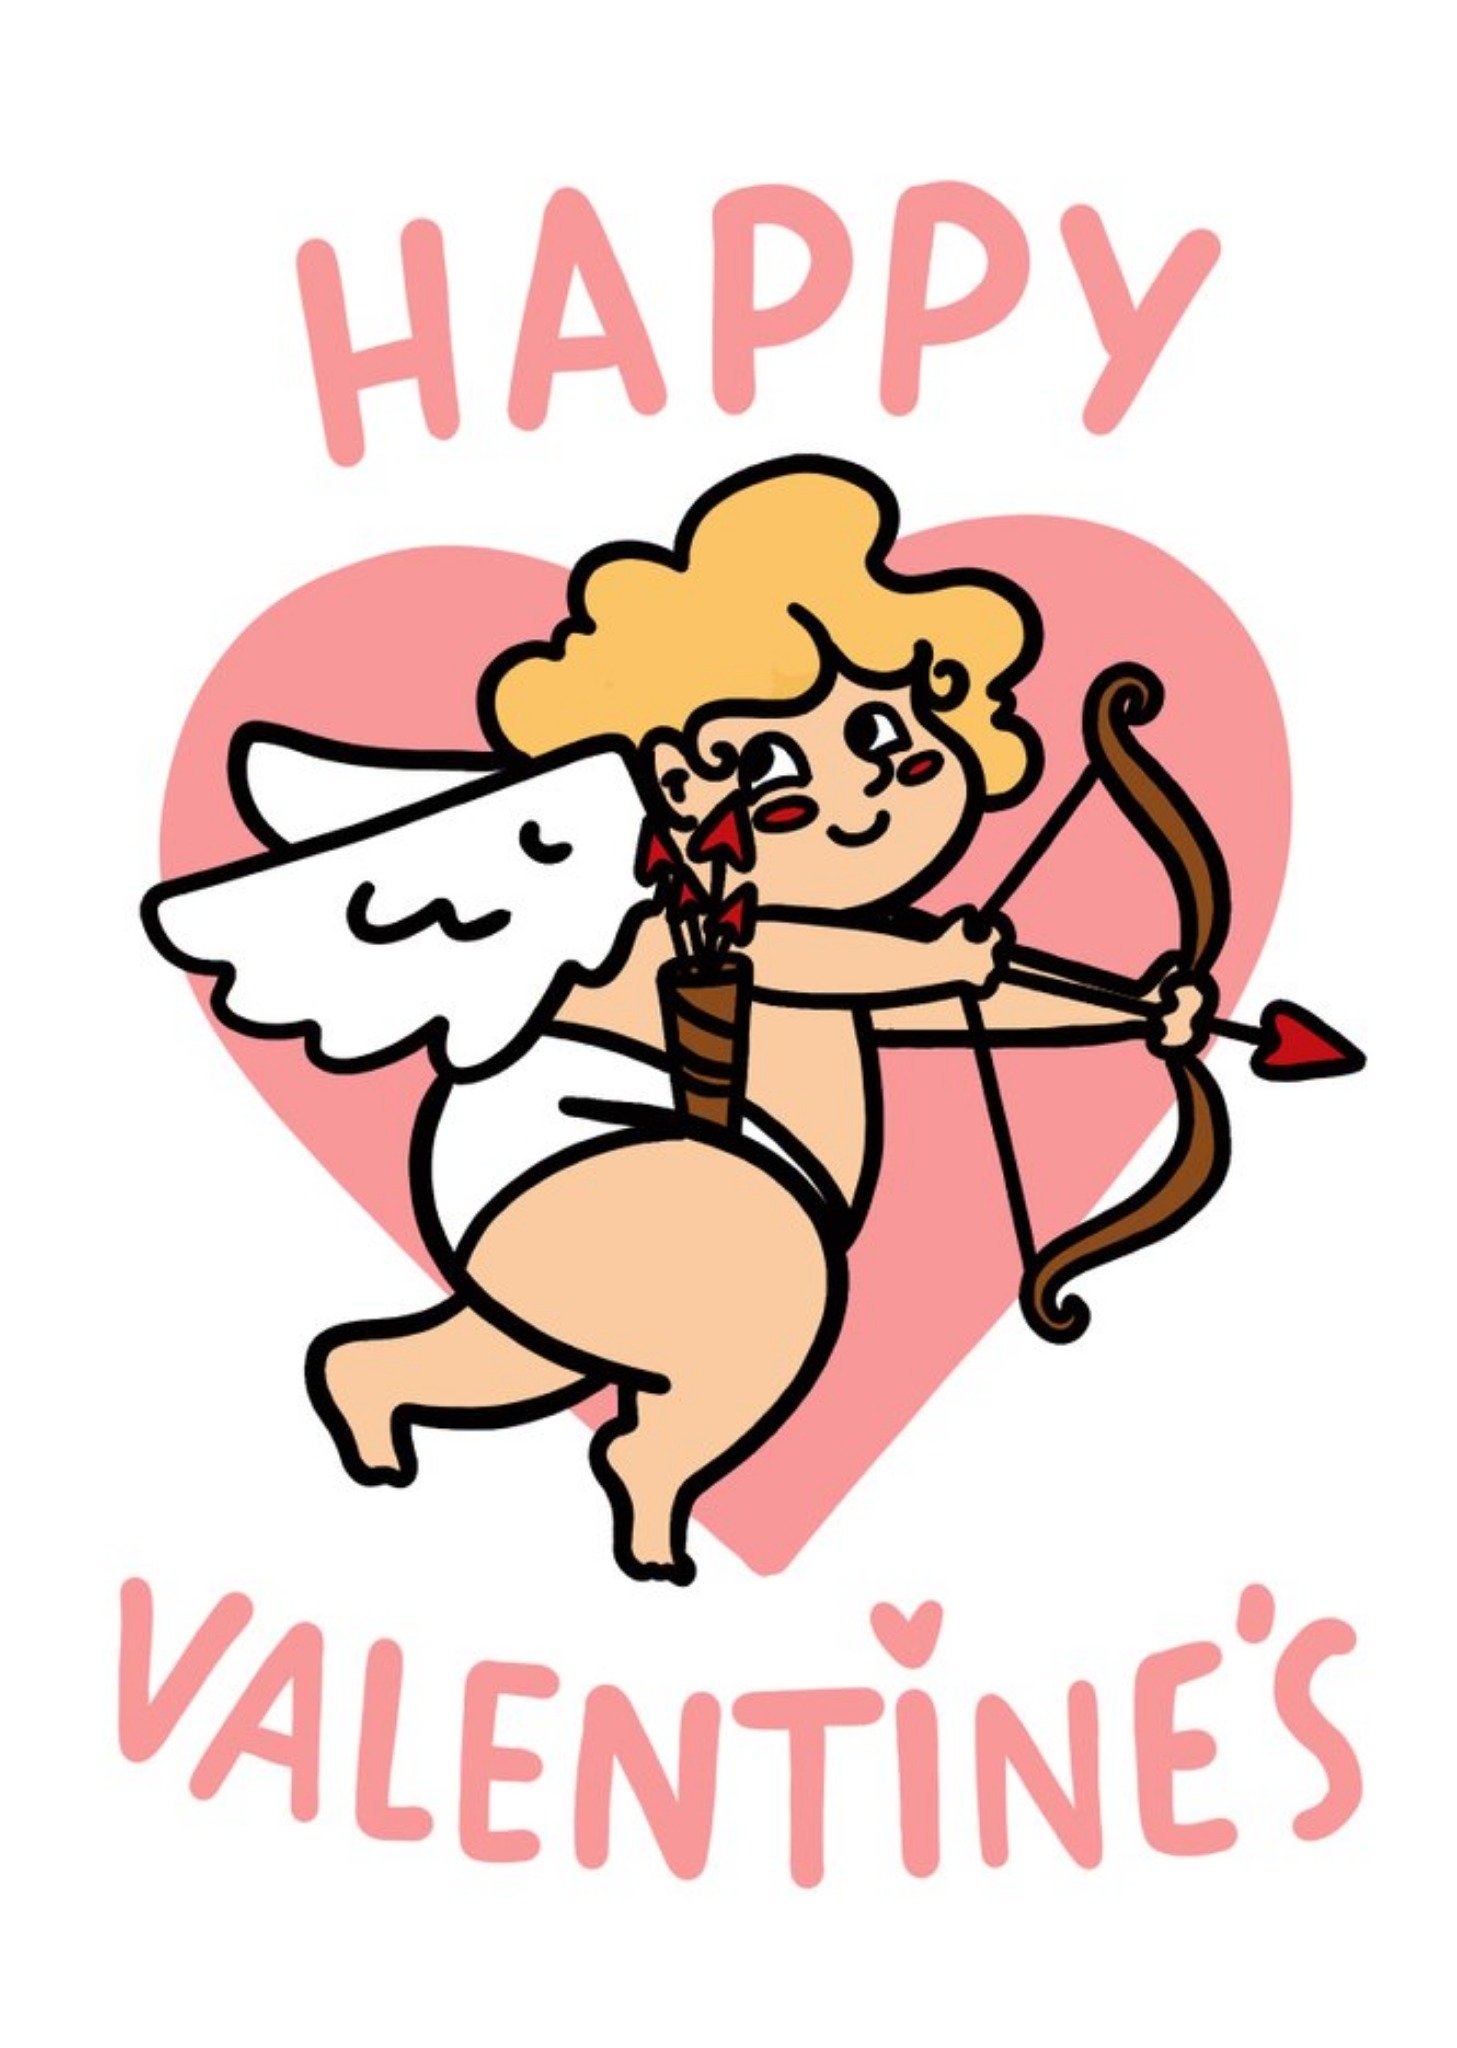 Moonpig Cute Illustrated Cupid With Bow And Arrow Valentine's Card, Large